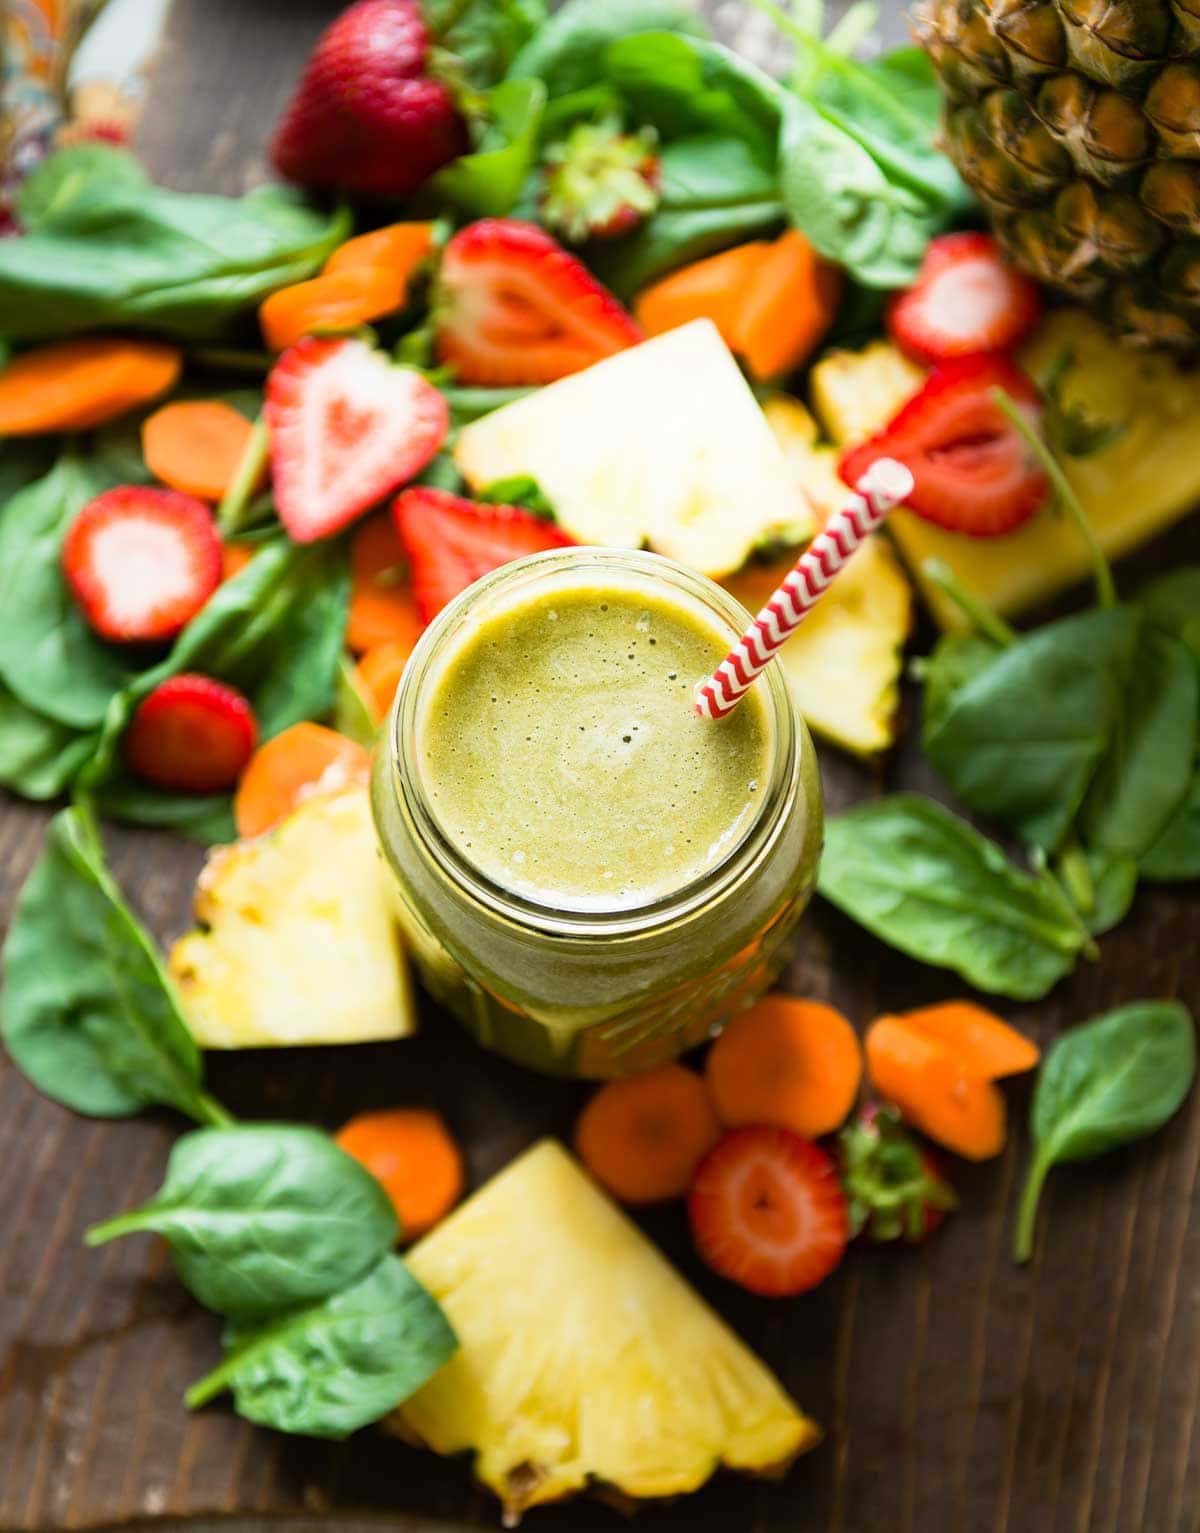 green smoothie in a glass jar with a paper straw, surrounded by fresh ingredients.